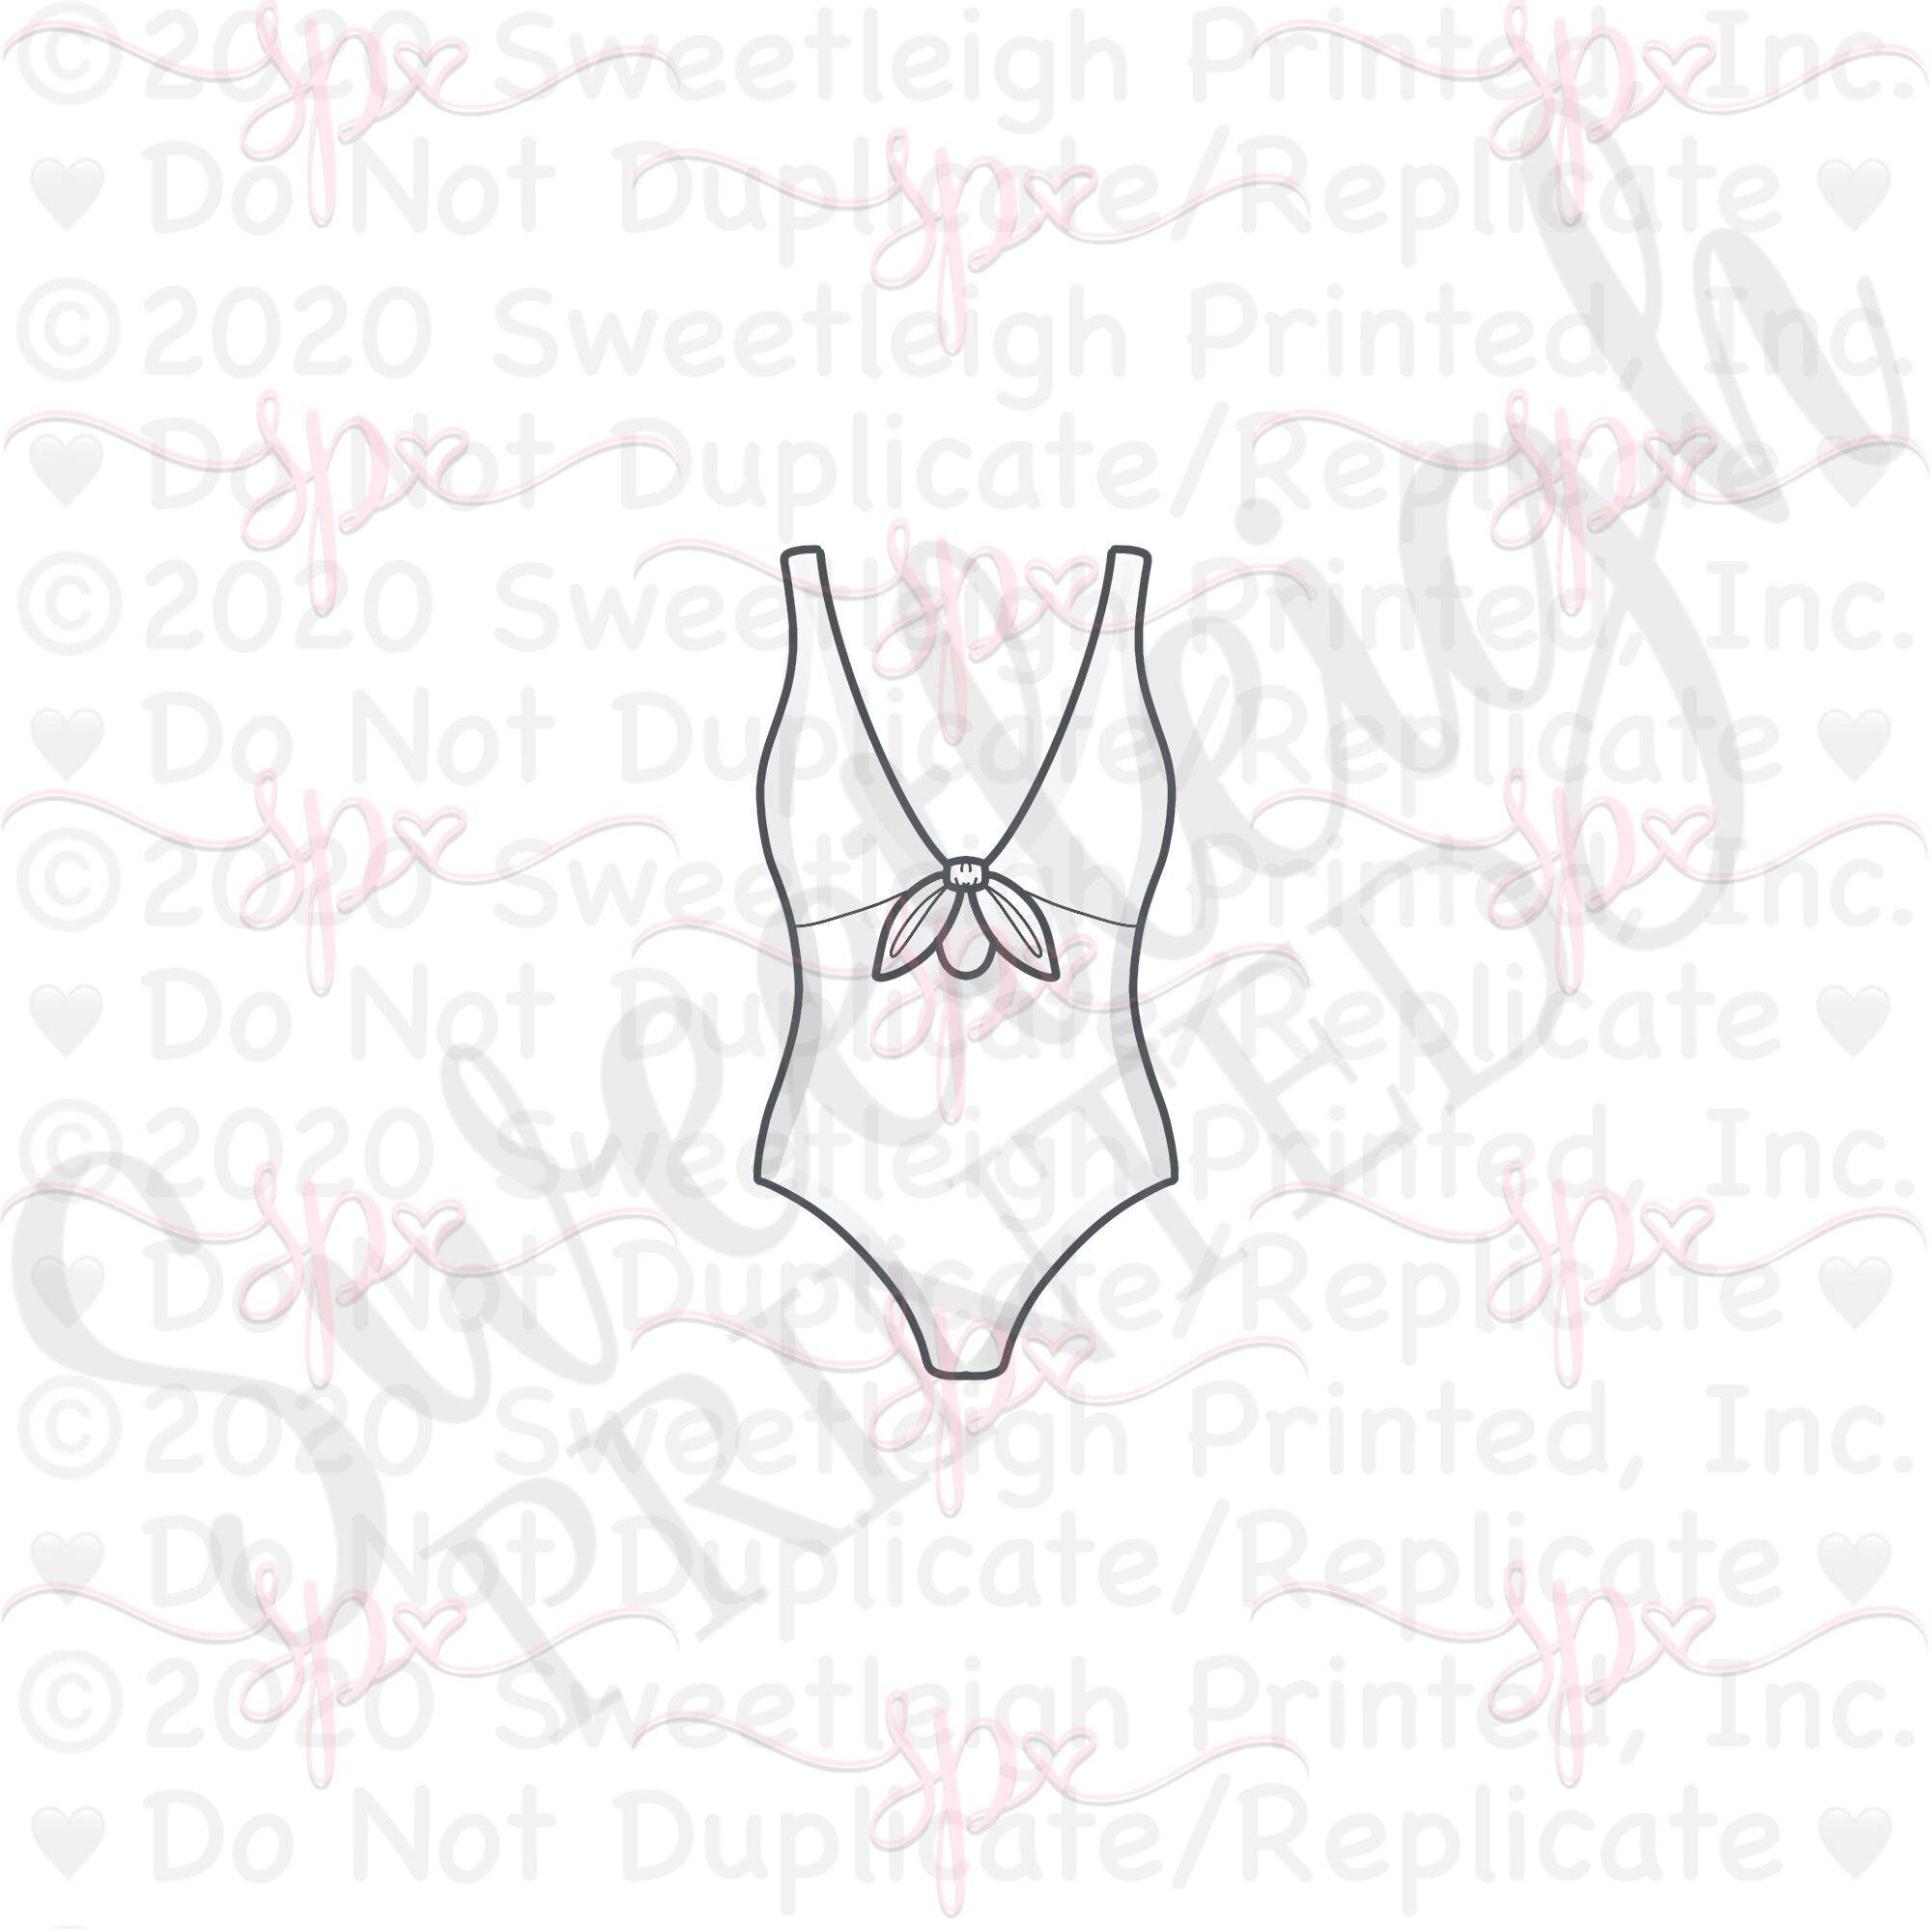 Knotted V Bathing Suit Cookie Cutter - Sweetleigh 